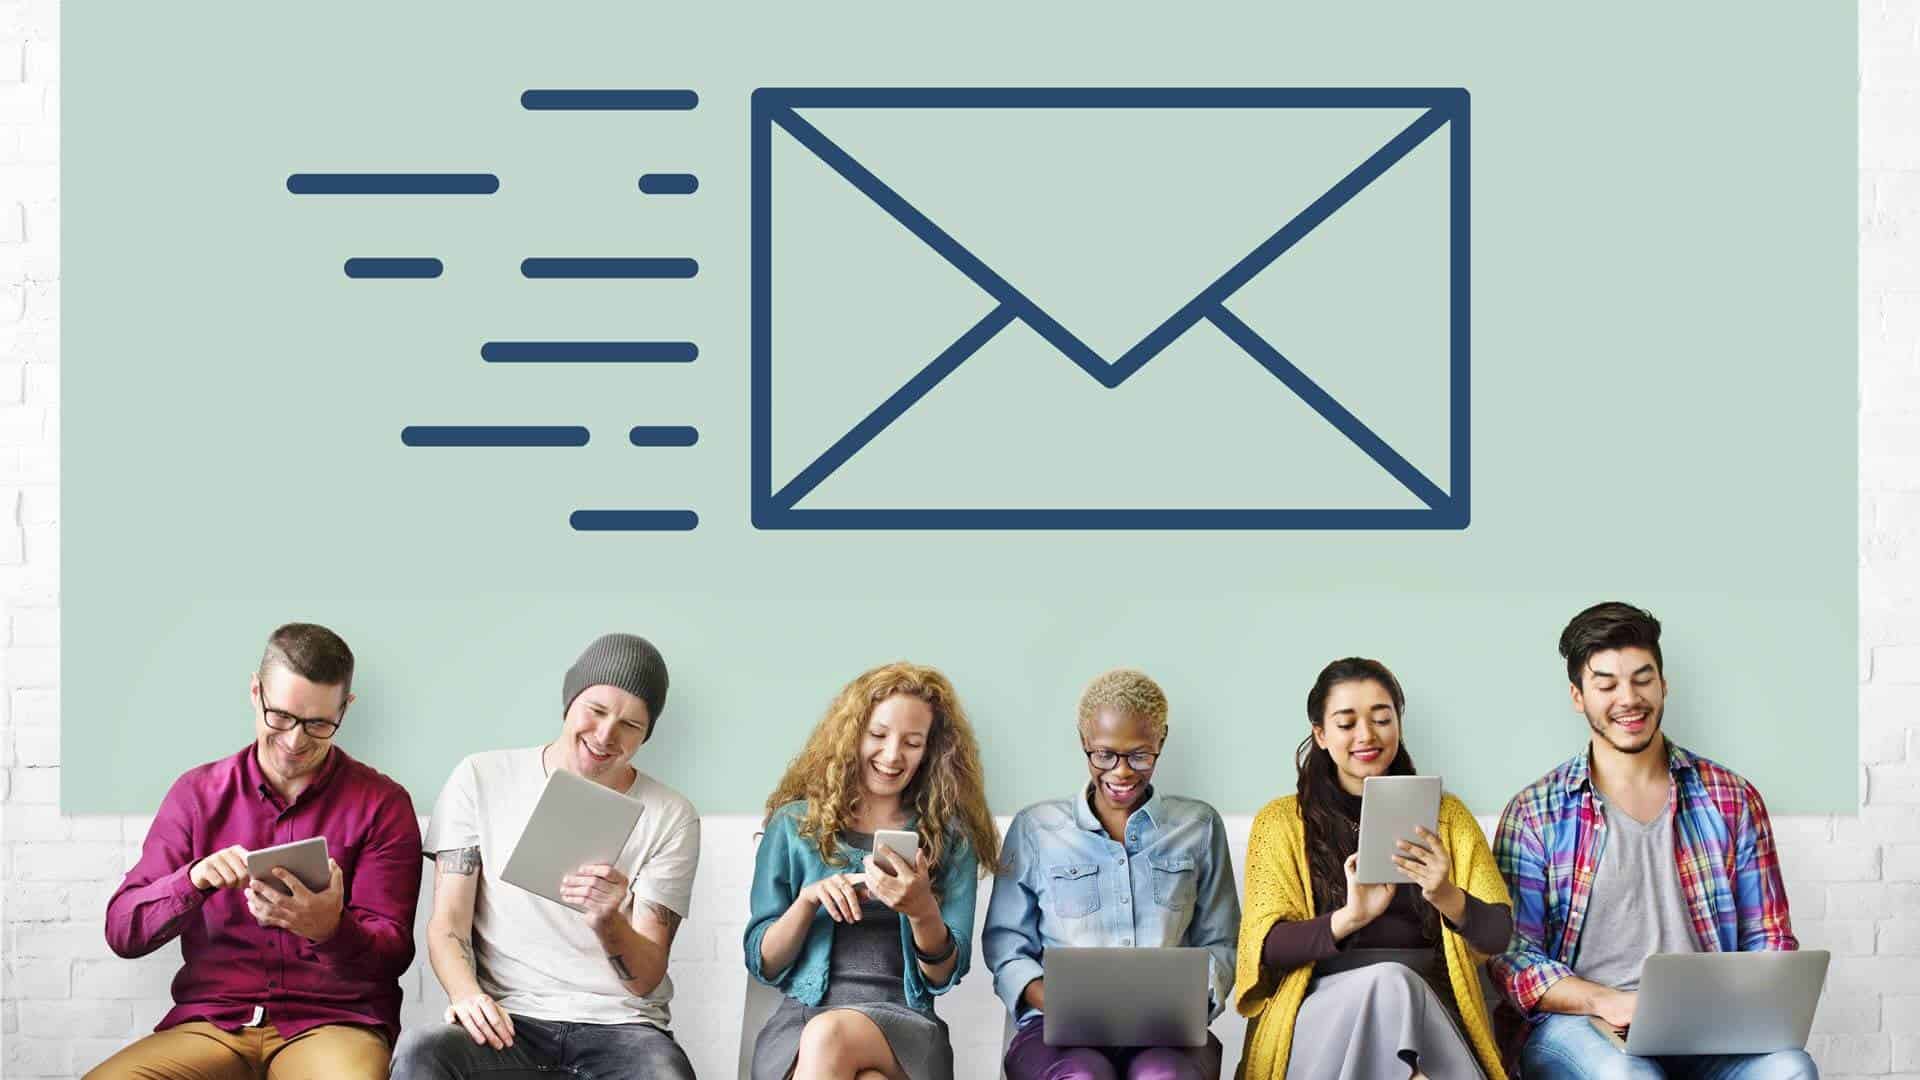 A group of people enthusiastically sitting in front of an email icon, celebrating the importance of morning emails.